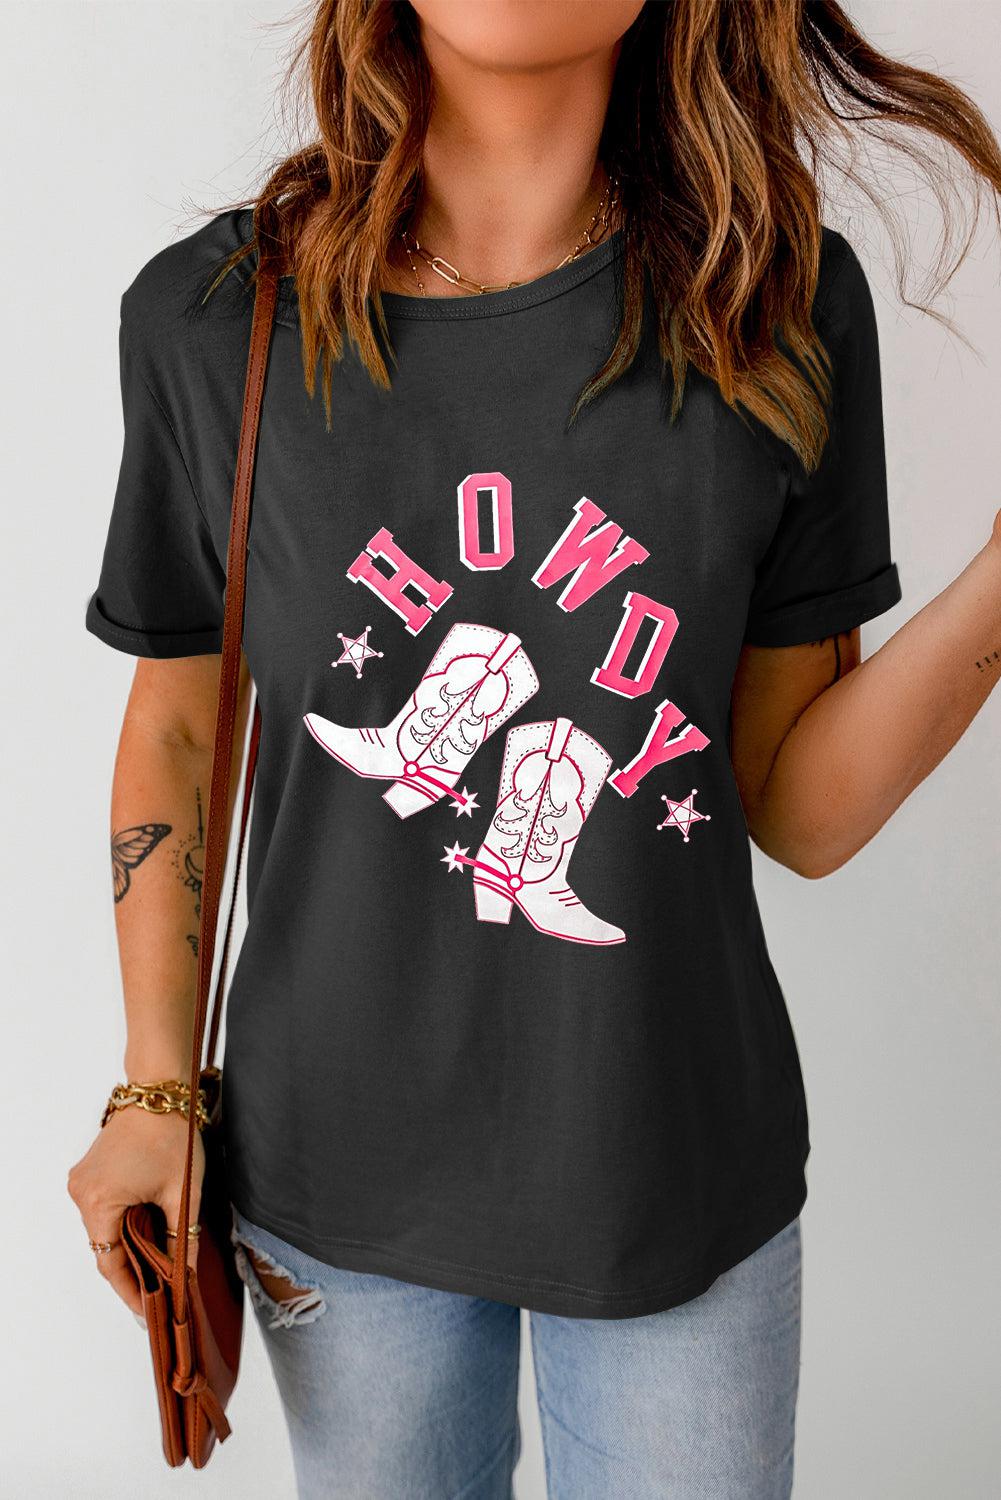 HOWDY Cowboy Boots Graphic Tee BLUE ZONE PLANET